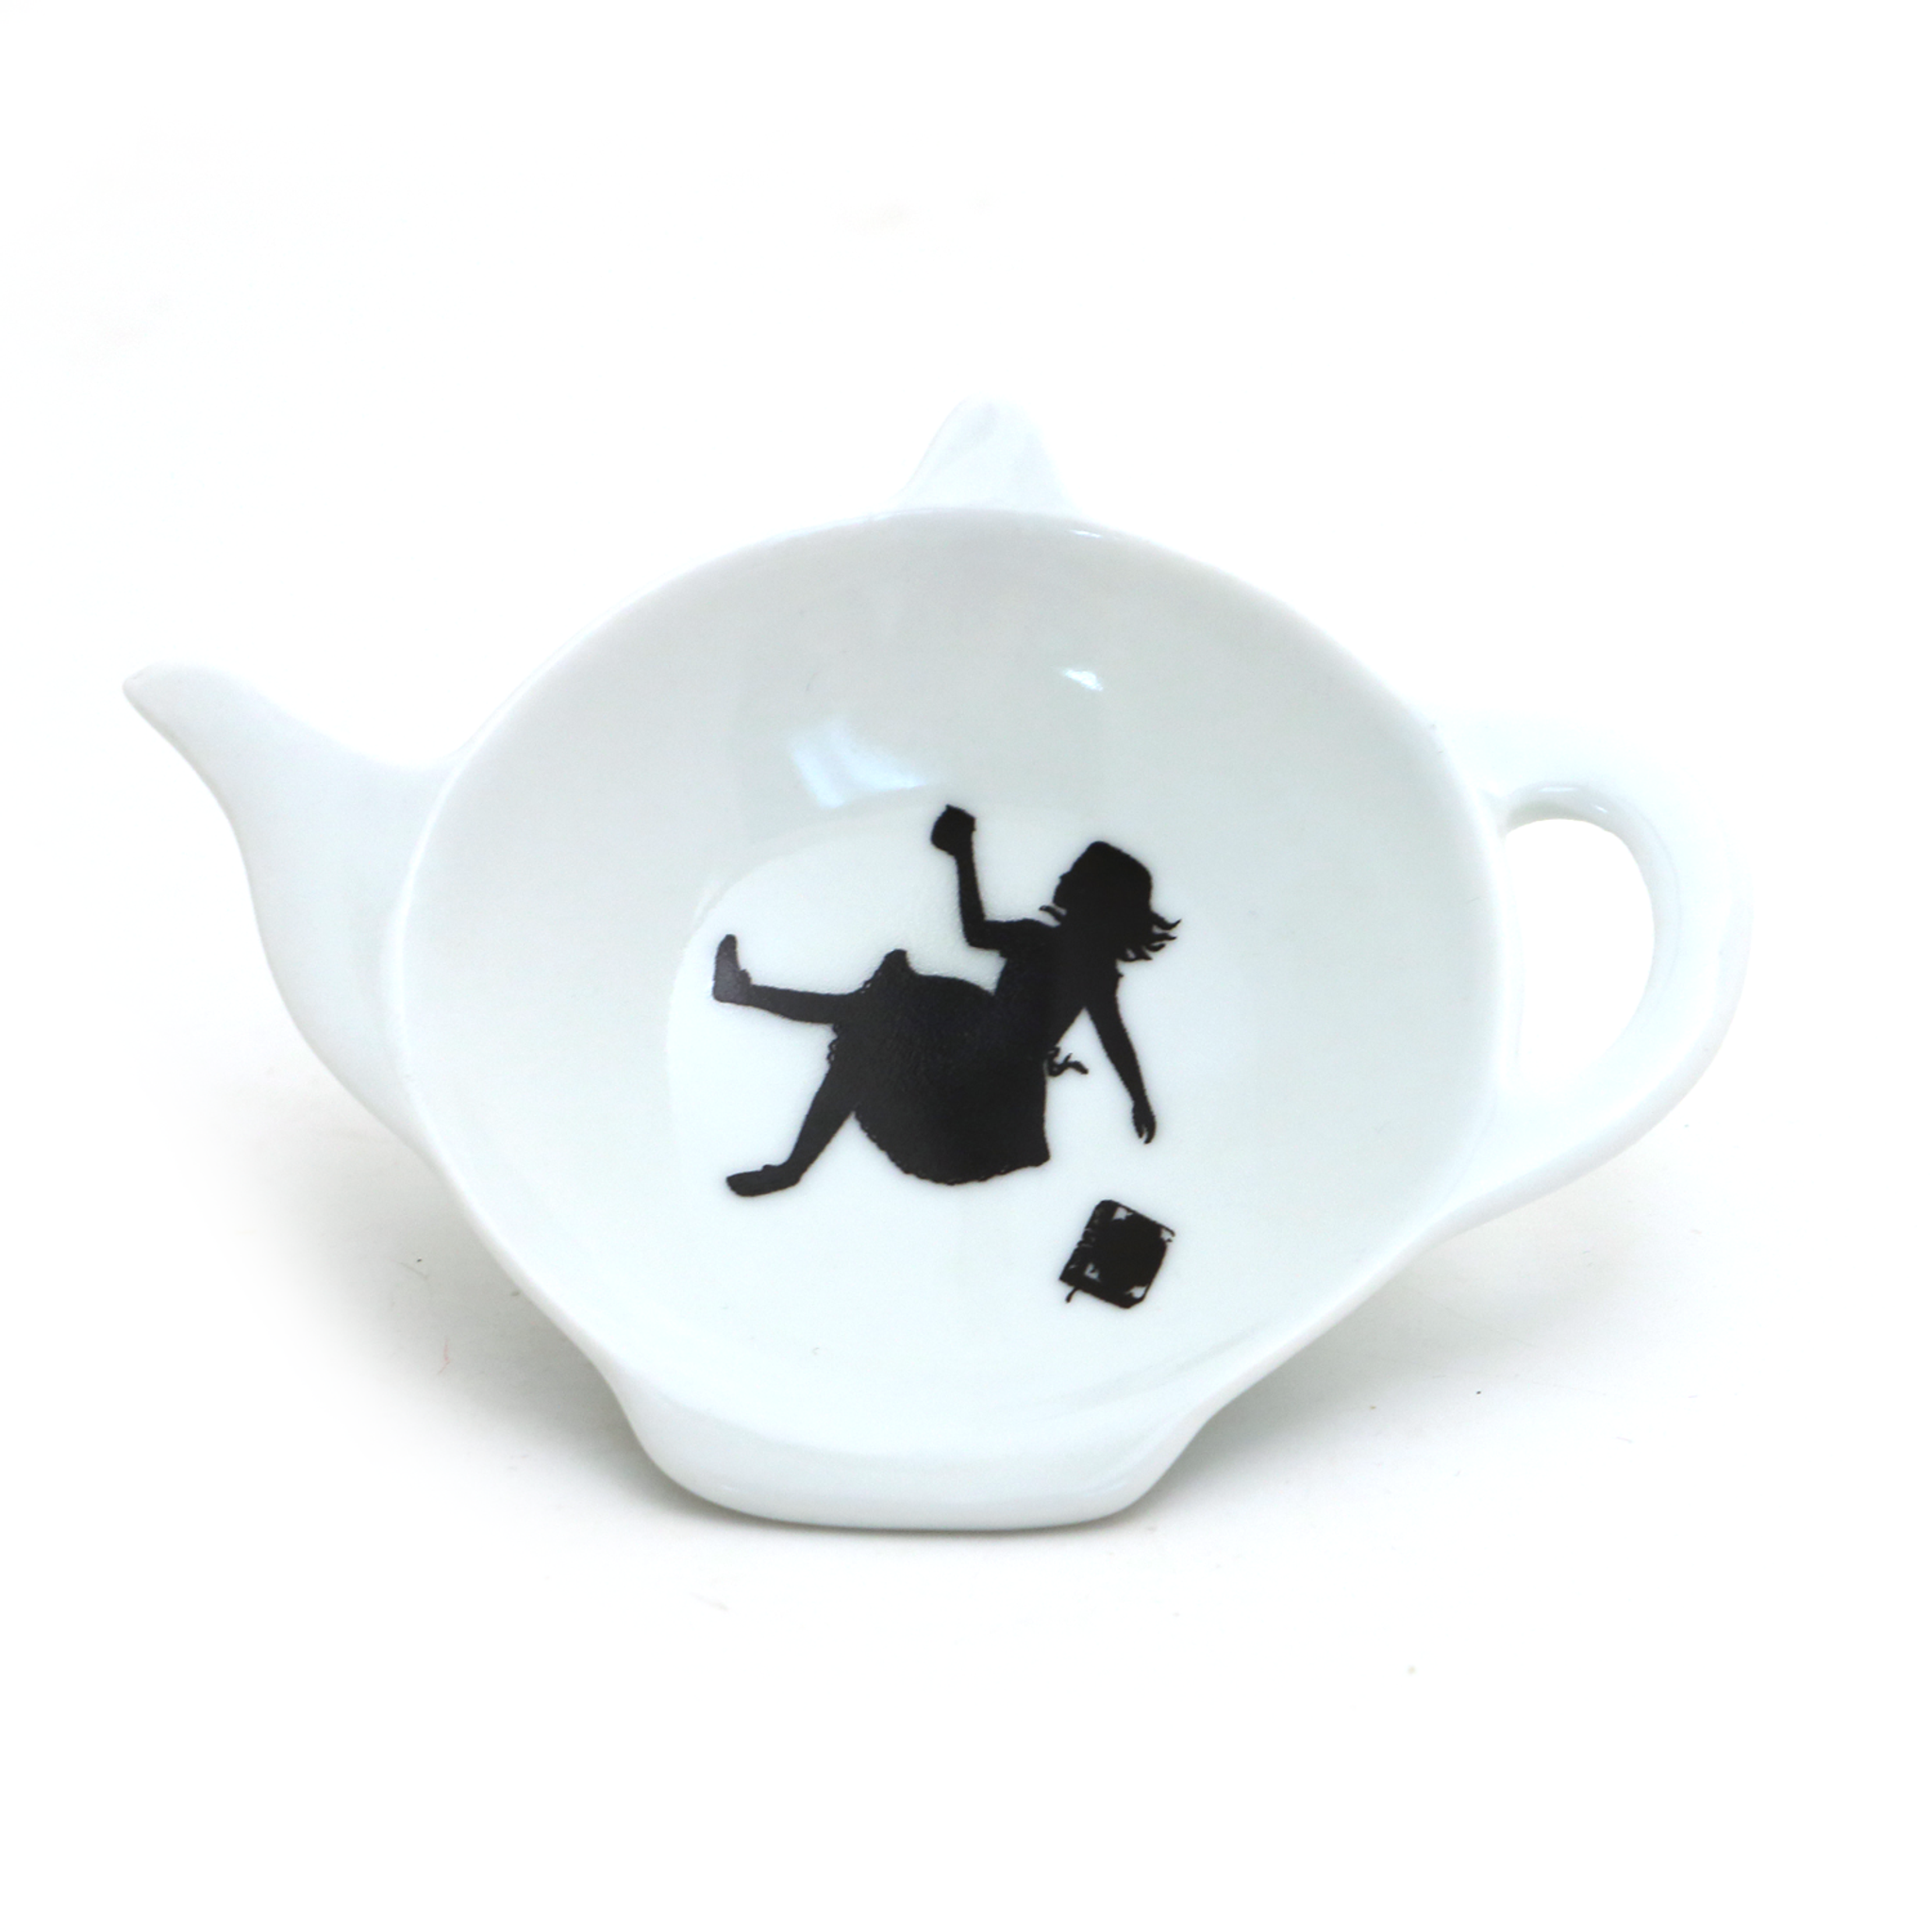 https://cdn11.bigcommerce.com/s-xkfyf2sykm/images/stencil/2048x2048/products/758/5978/alice-teabag-holder_1__22161.1653615021.png?c=2